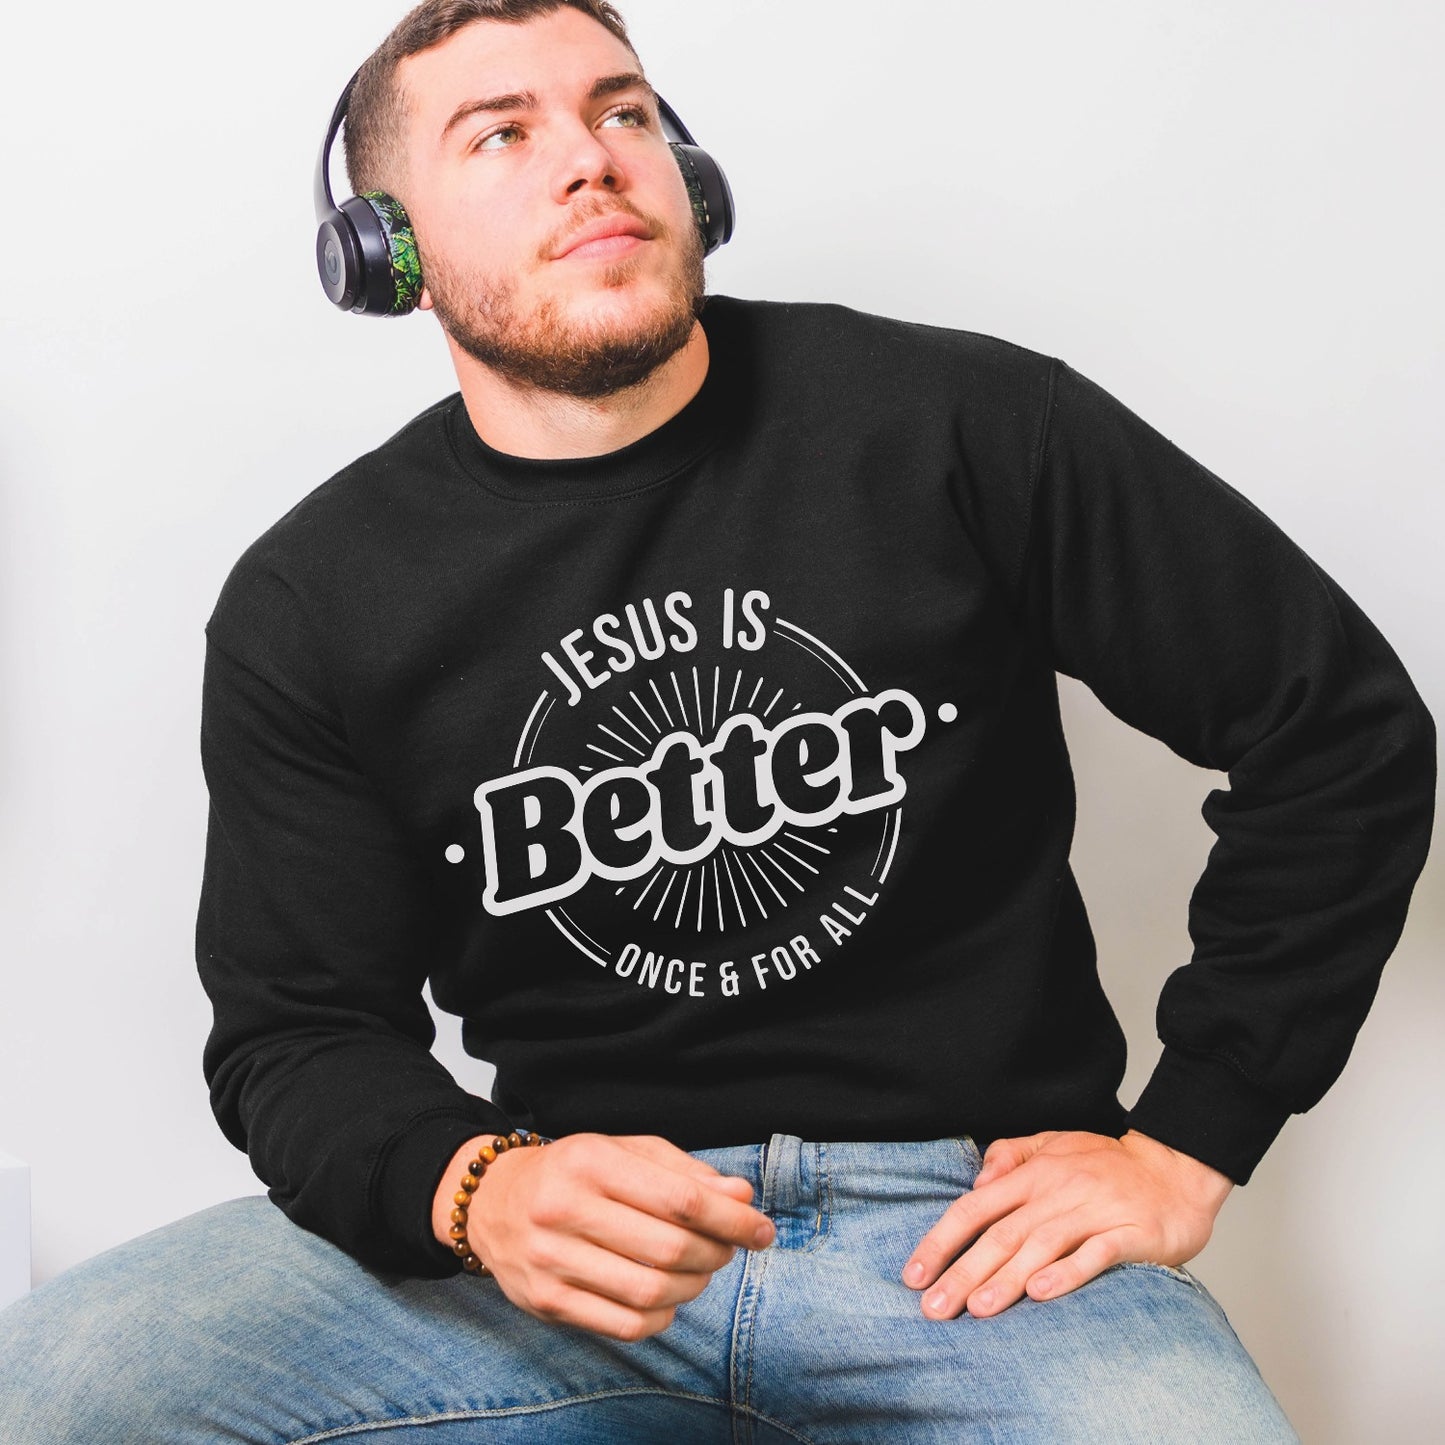 Man wearing a black faith-based cozy sweatshirt with "Jesus is BETTER - Once and For All" logo style design in white, created for Christian men and women